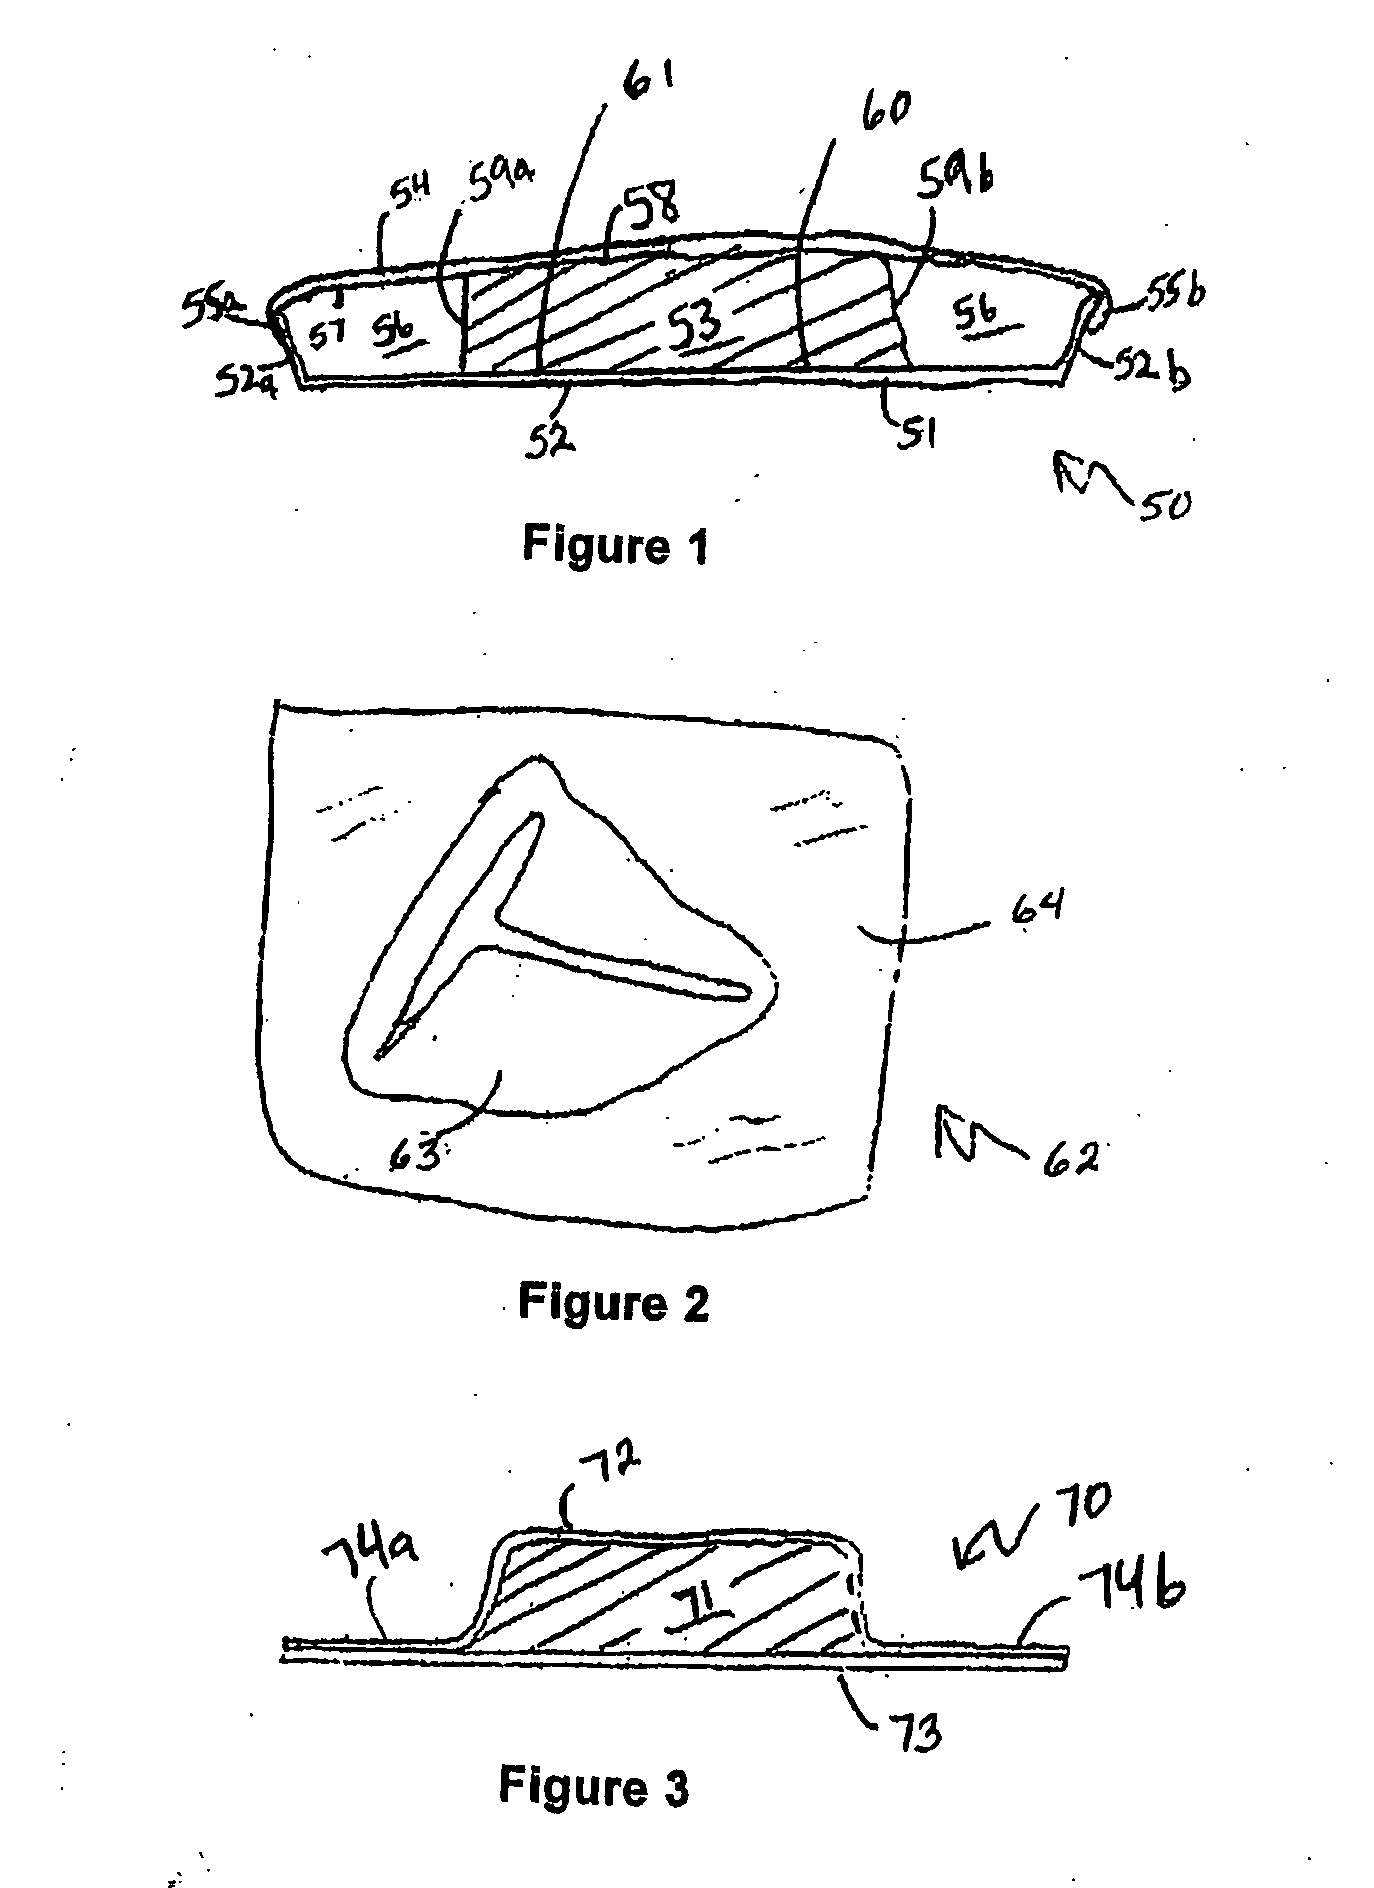 Method for distributing a myoglobin-containing food product